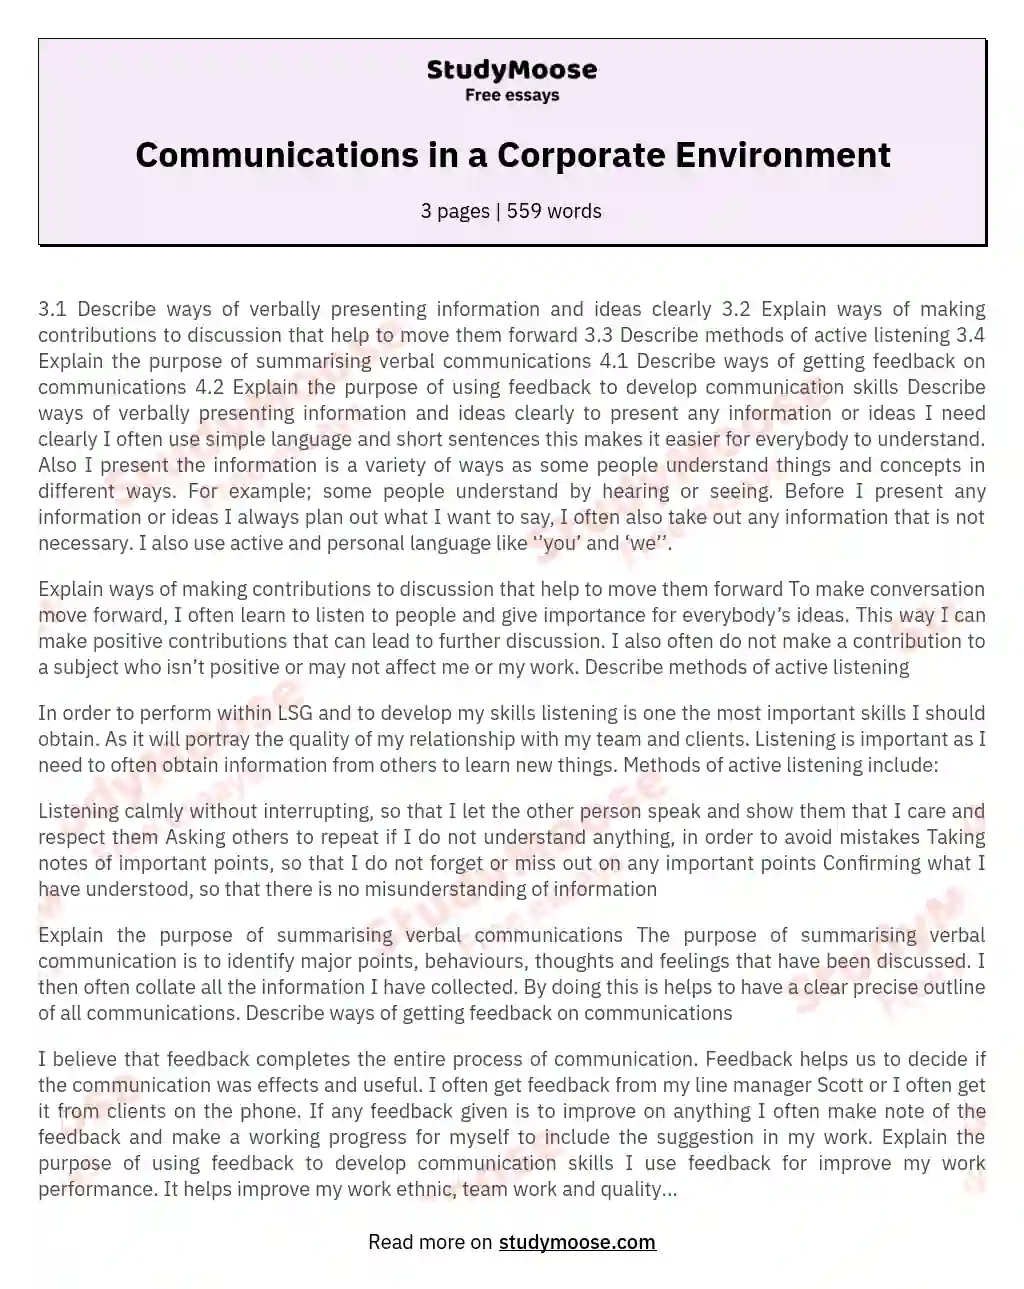 Communications in a Corporate Environment essay